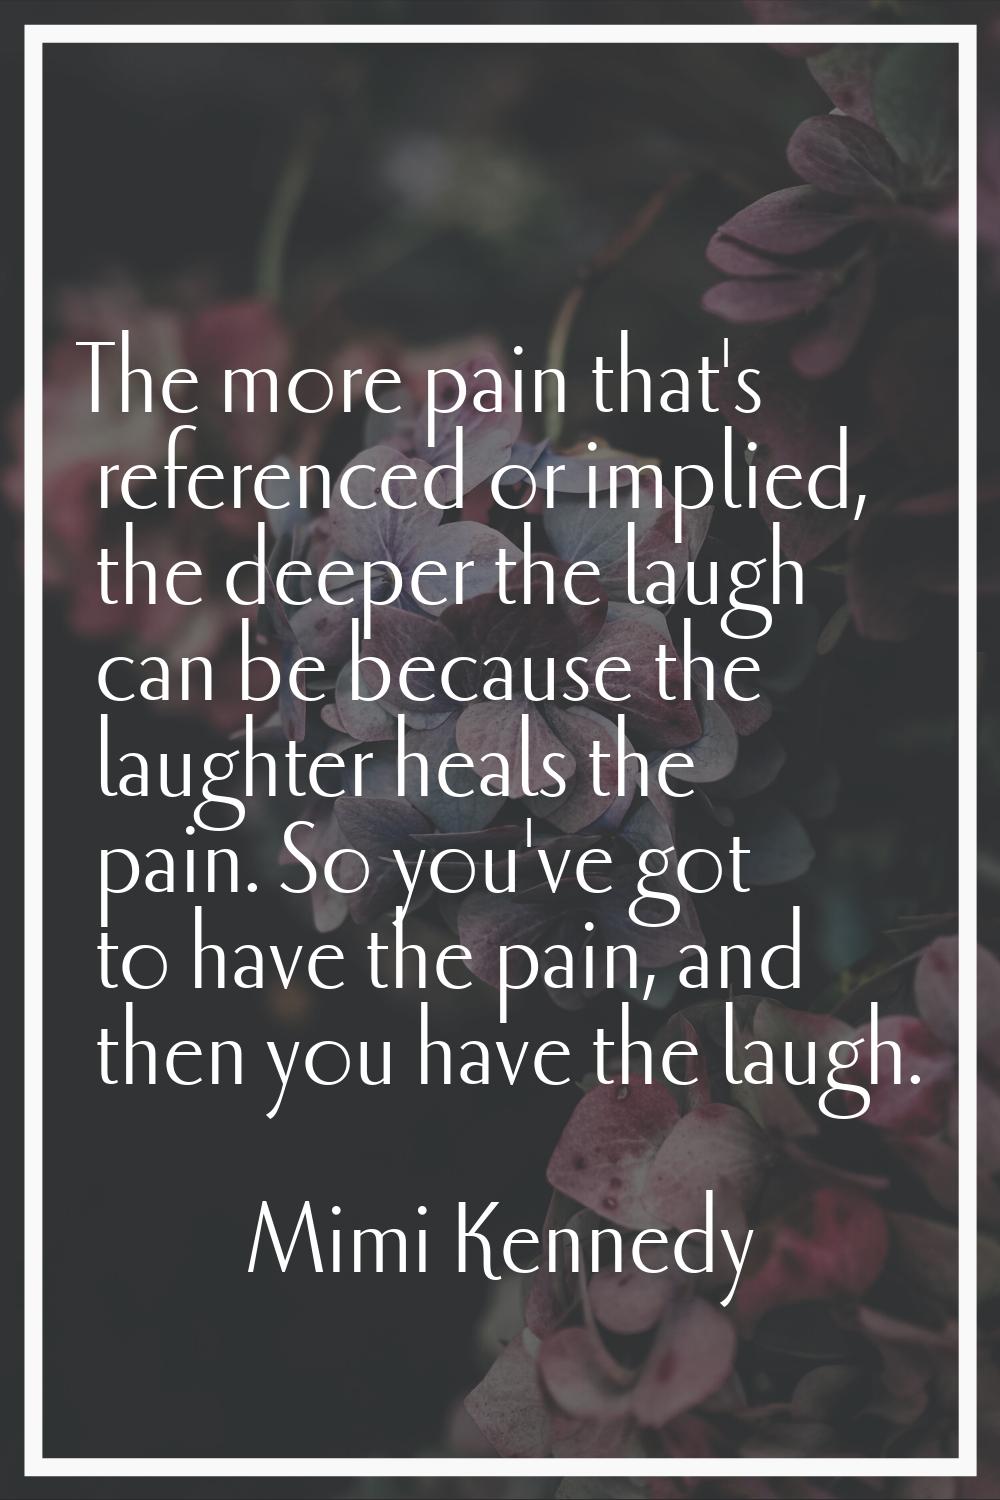 The more pain that's referenced or implied, the deeper the laugh can be because the laughter heals 